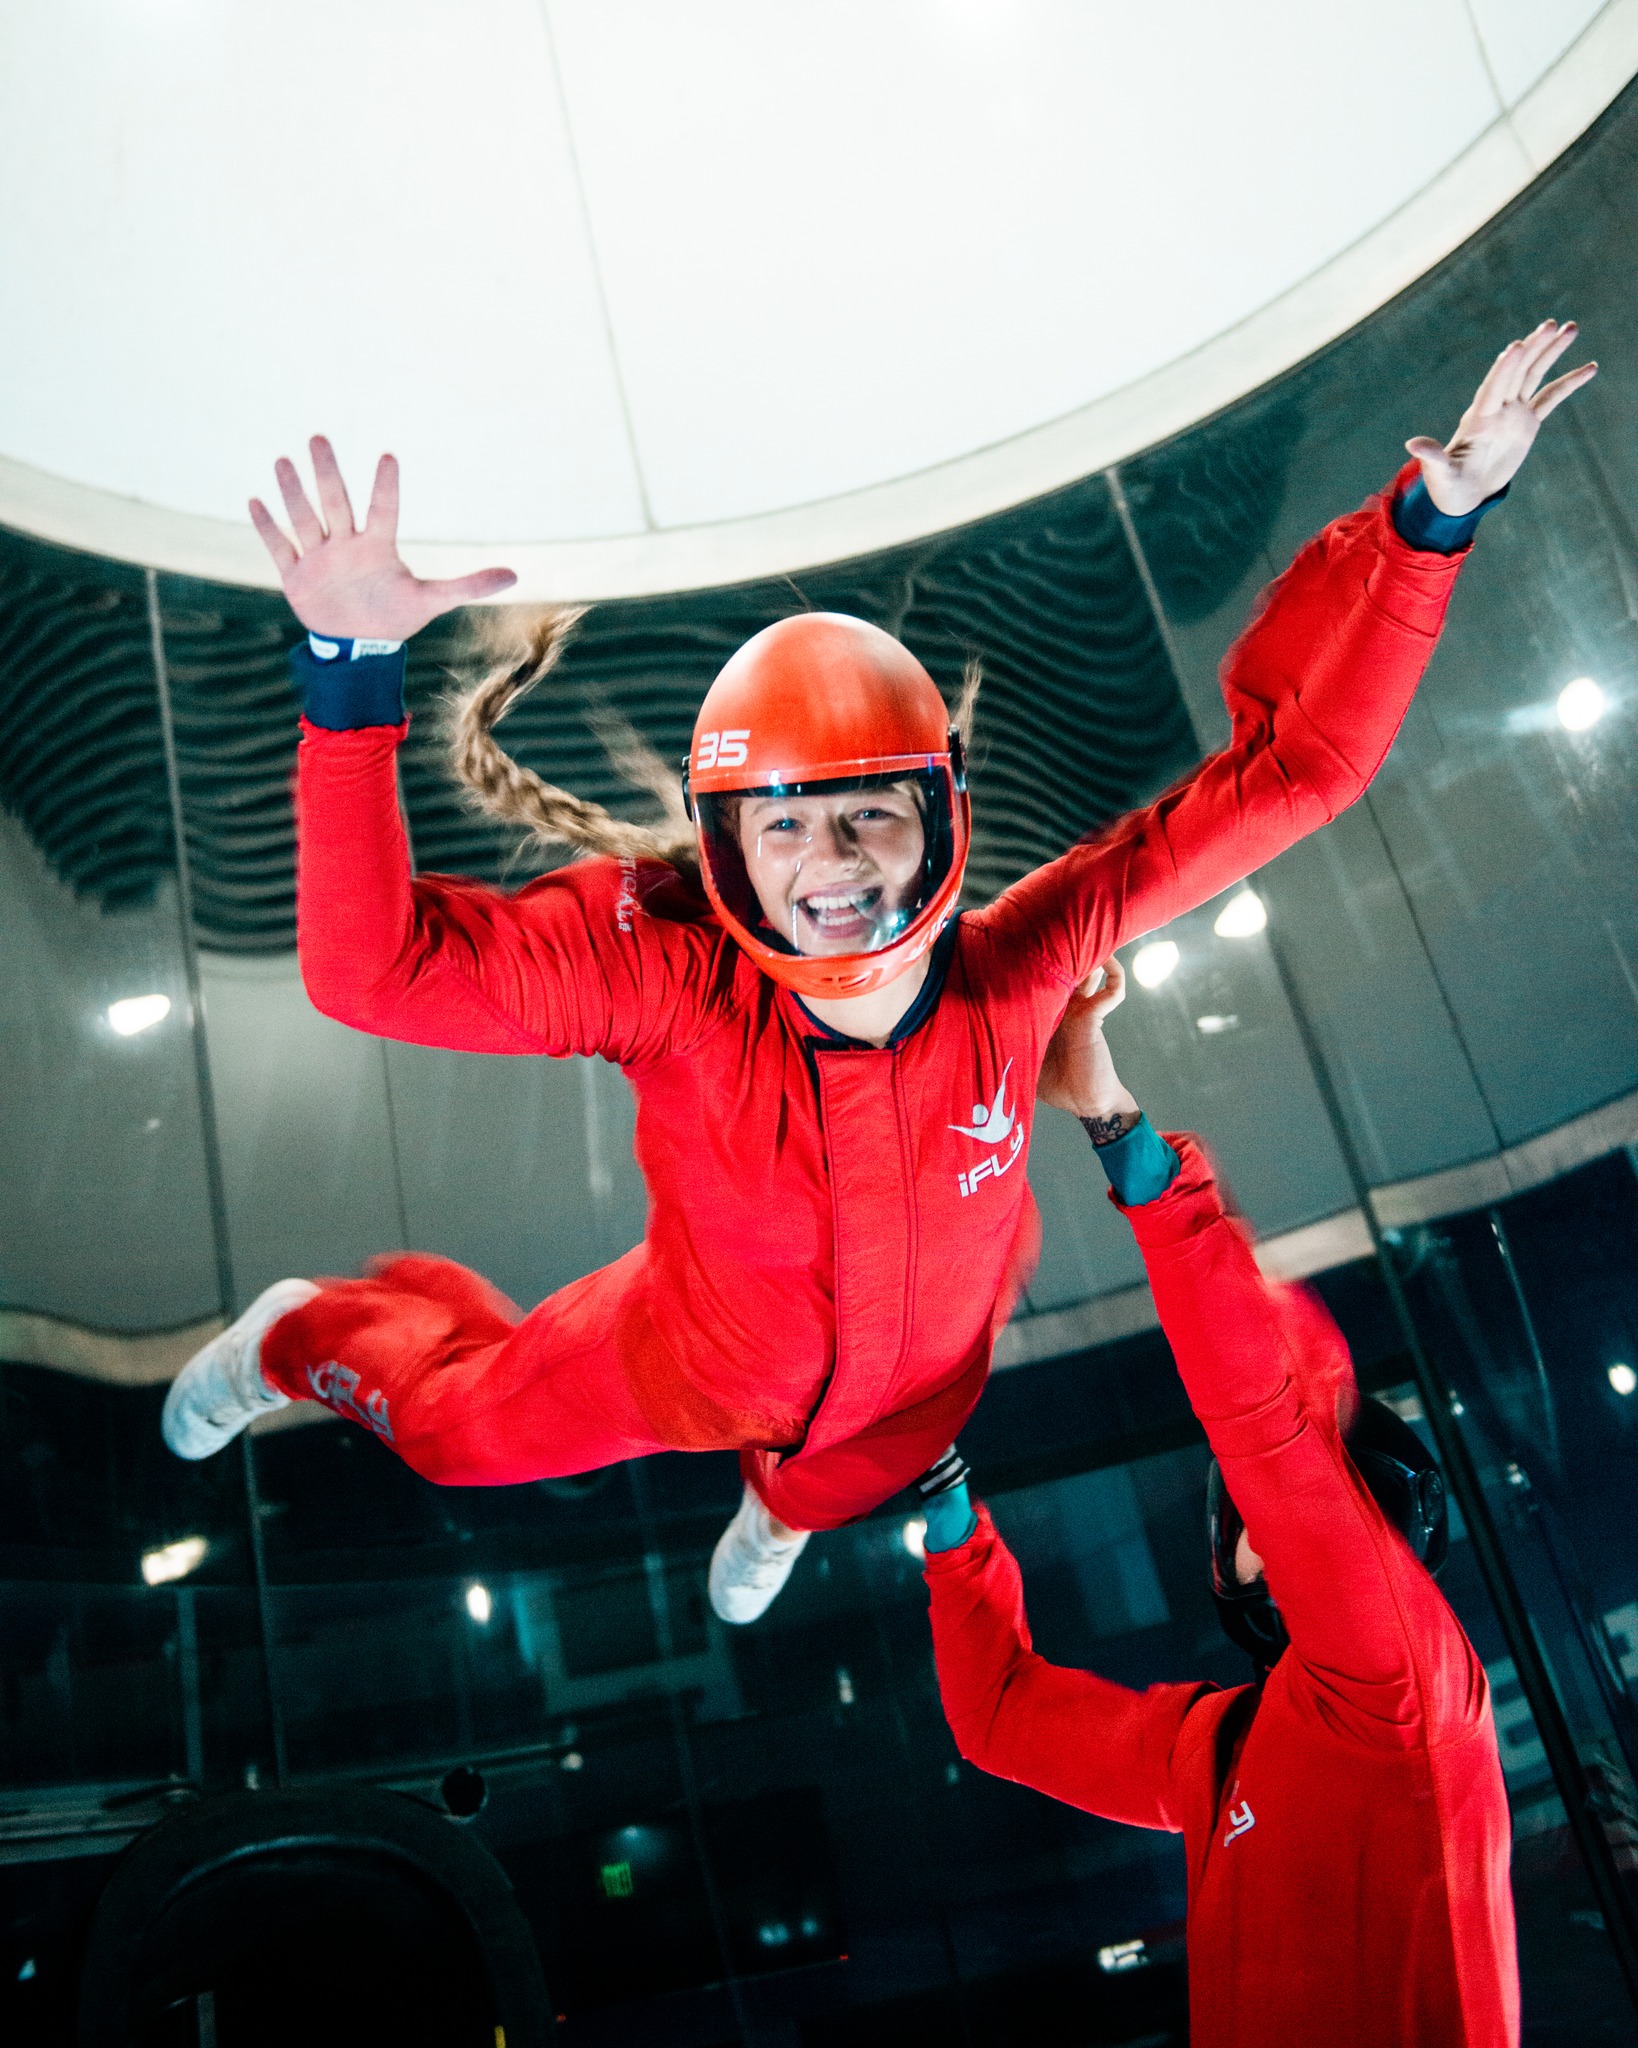 People in the iFLY wind tube.